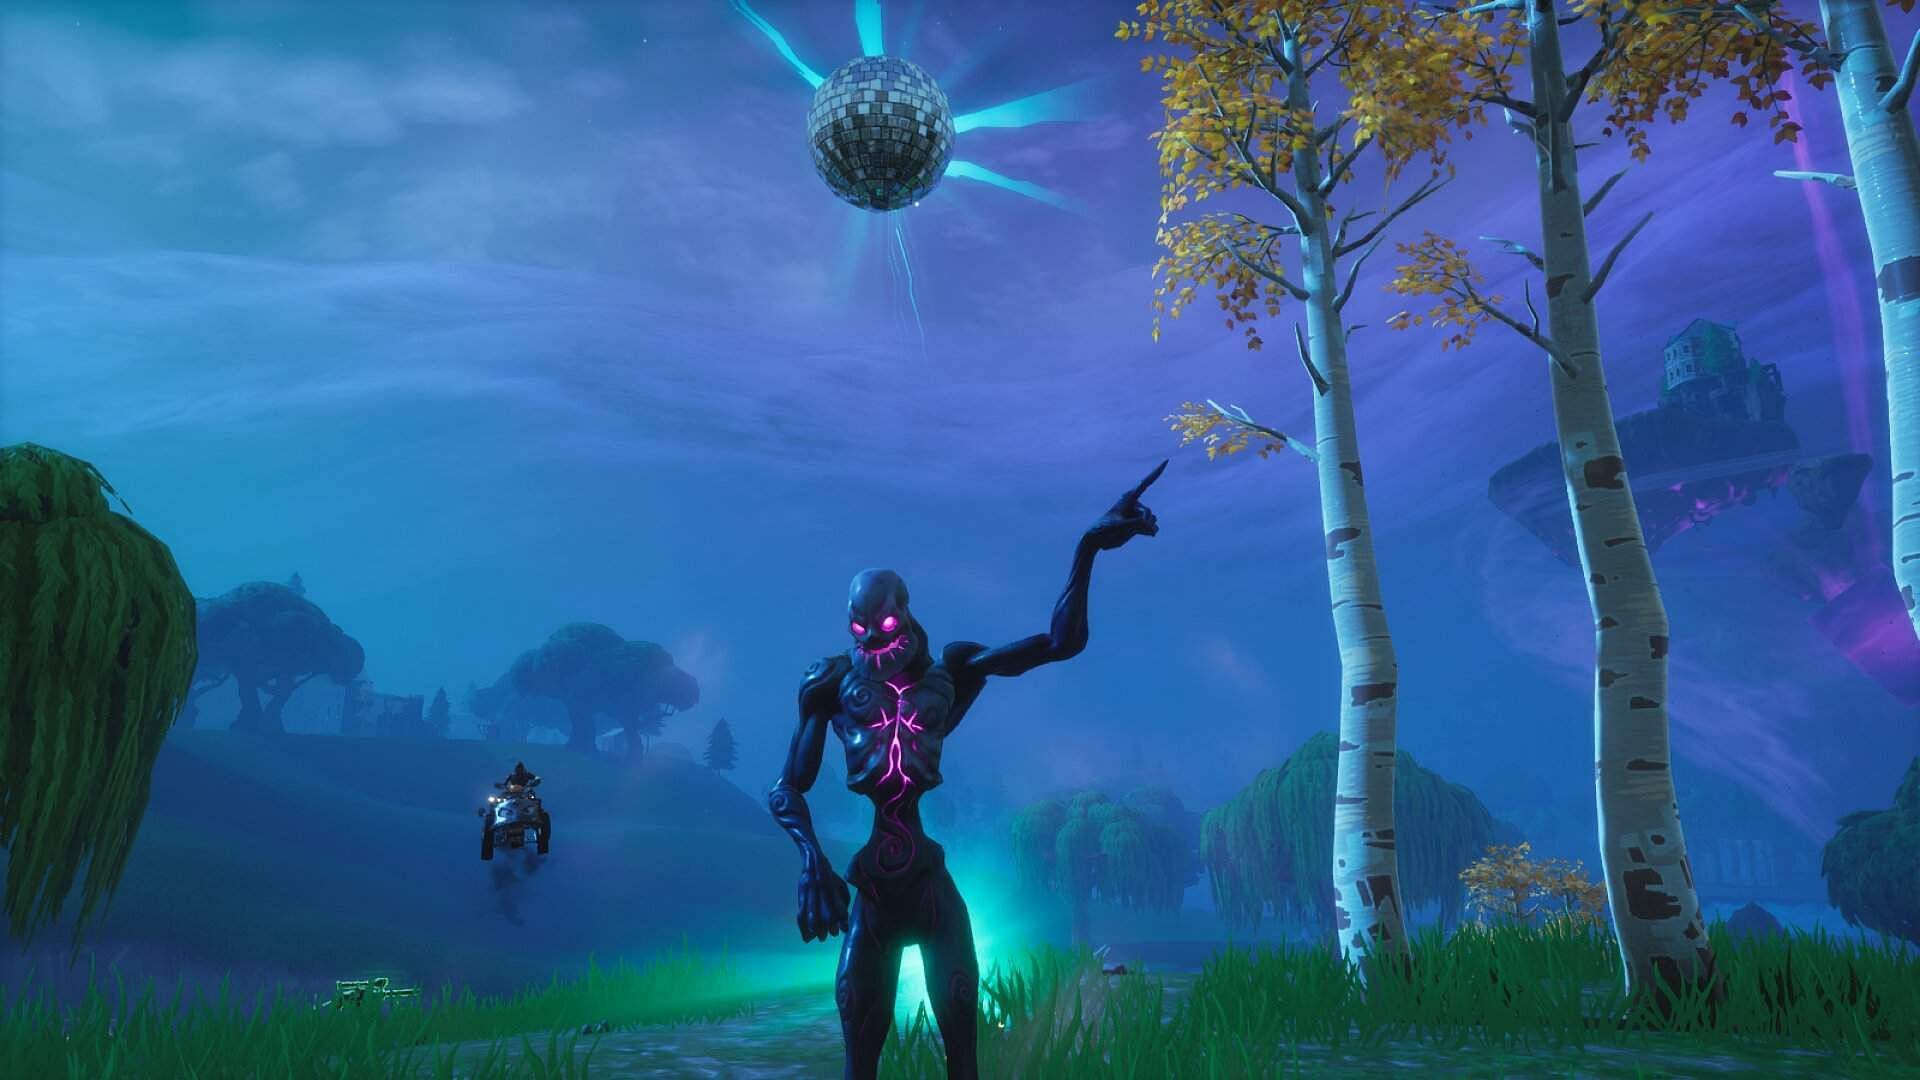 Fortnite players will have to make opponents dance with Boogie Bombs in Week 8 (Image via Epic Games)